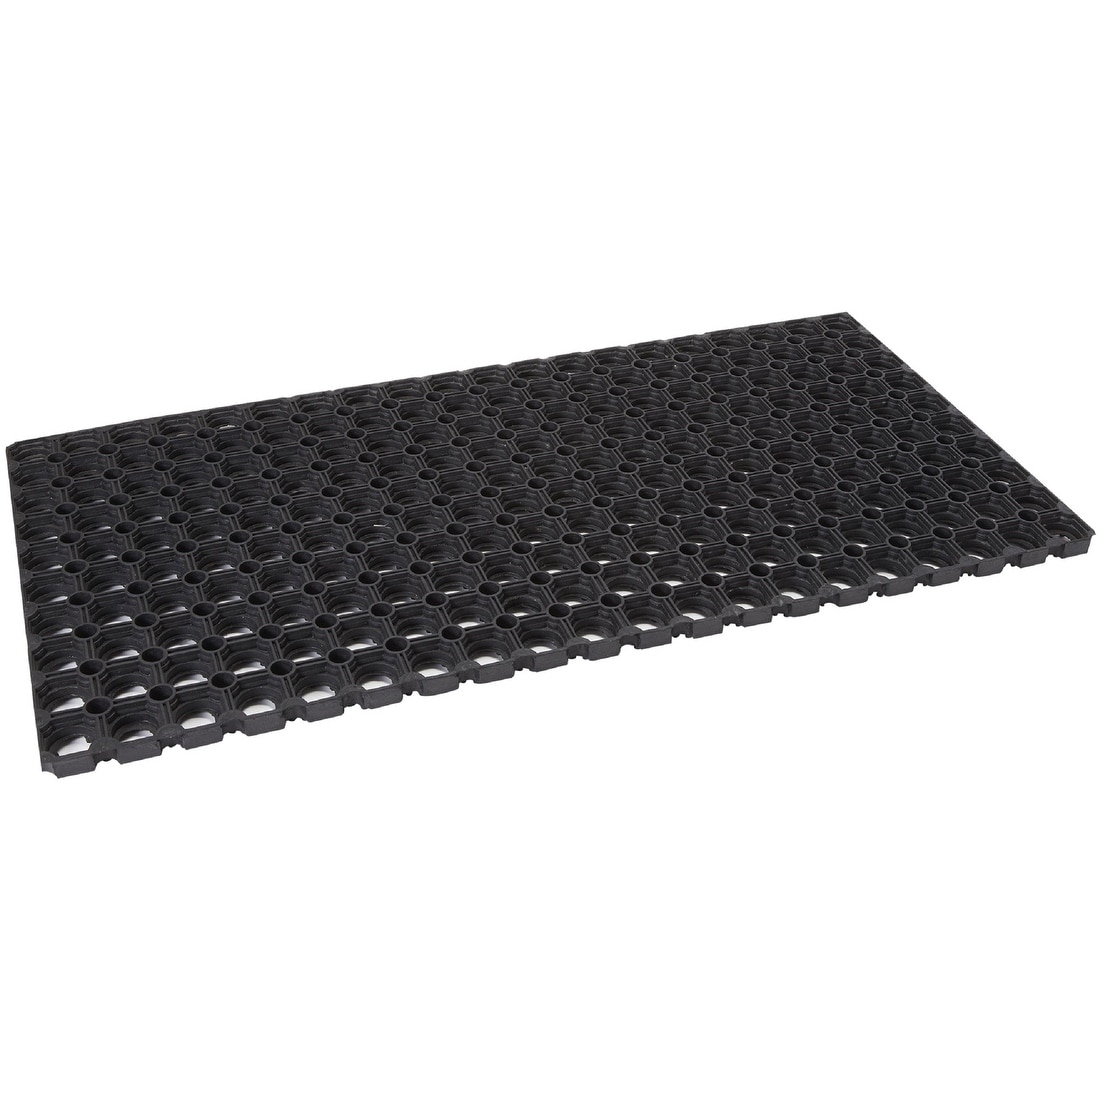 https://ak1.ostkcdn.com/images/products/is/images/direct/ef8a9e748da27d288e9e30e87e376386a34bc8a1/Anti-Fatigue-Perforated-Entrance-Rubber-Floor-Mat%2C-32%22-x-47%22.jpg